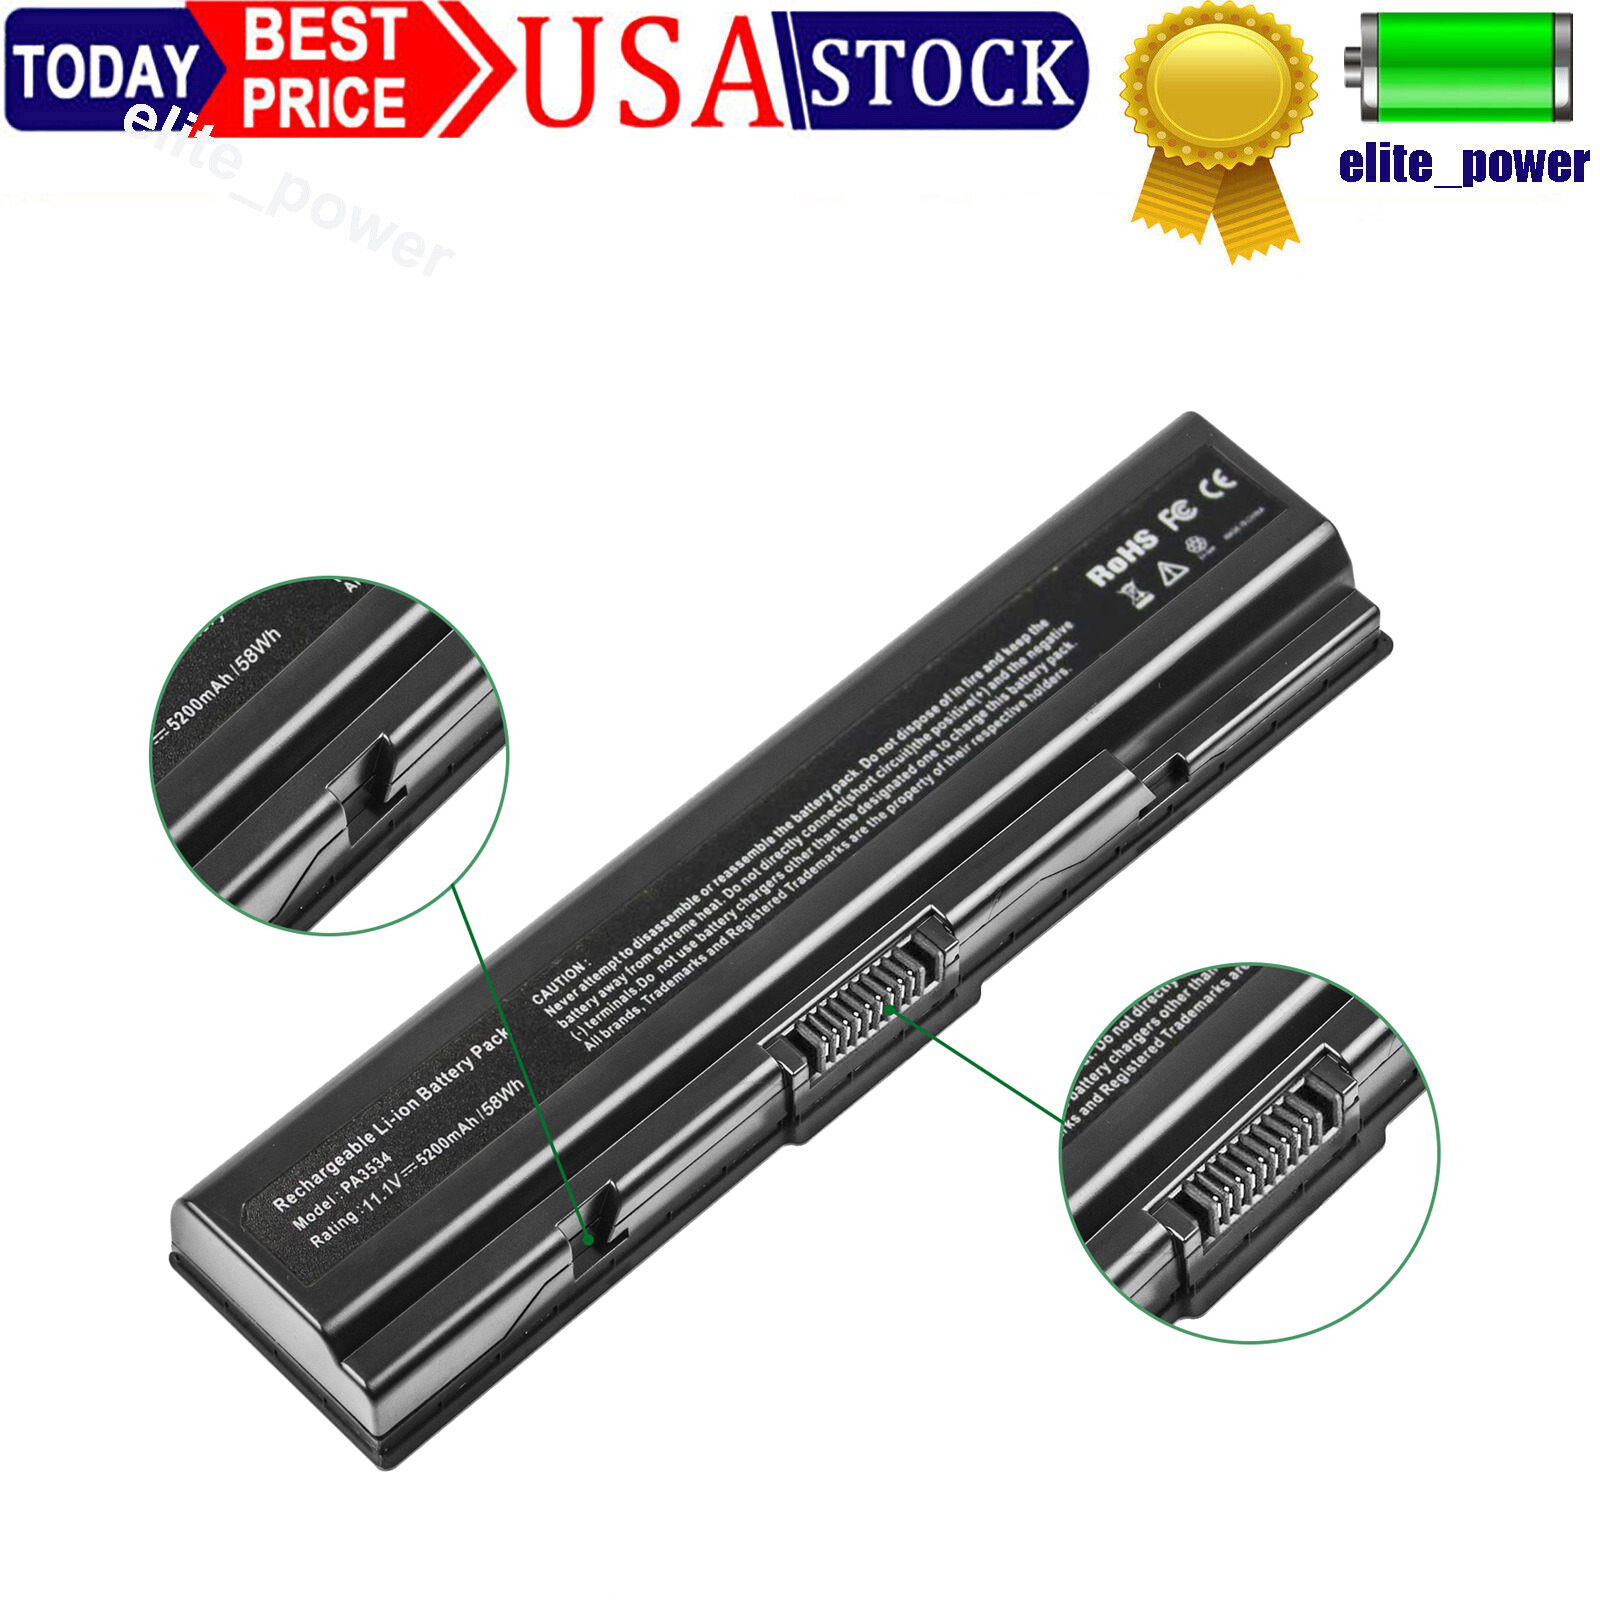 Spare Battery for Toshiba Satellite A200 A205 A210 A300 A355 A500 A505 L300 M200